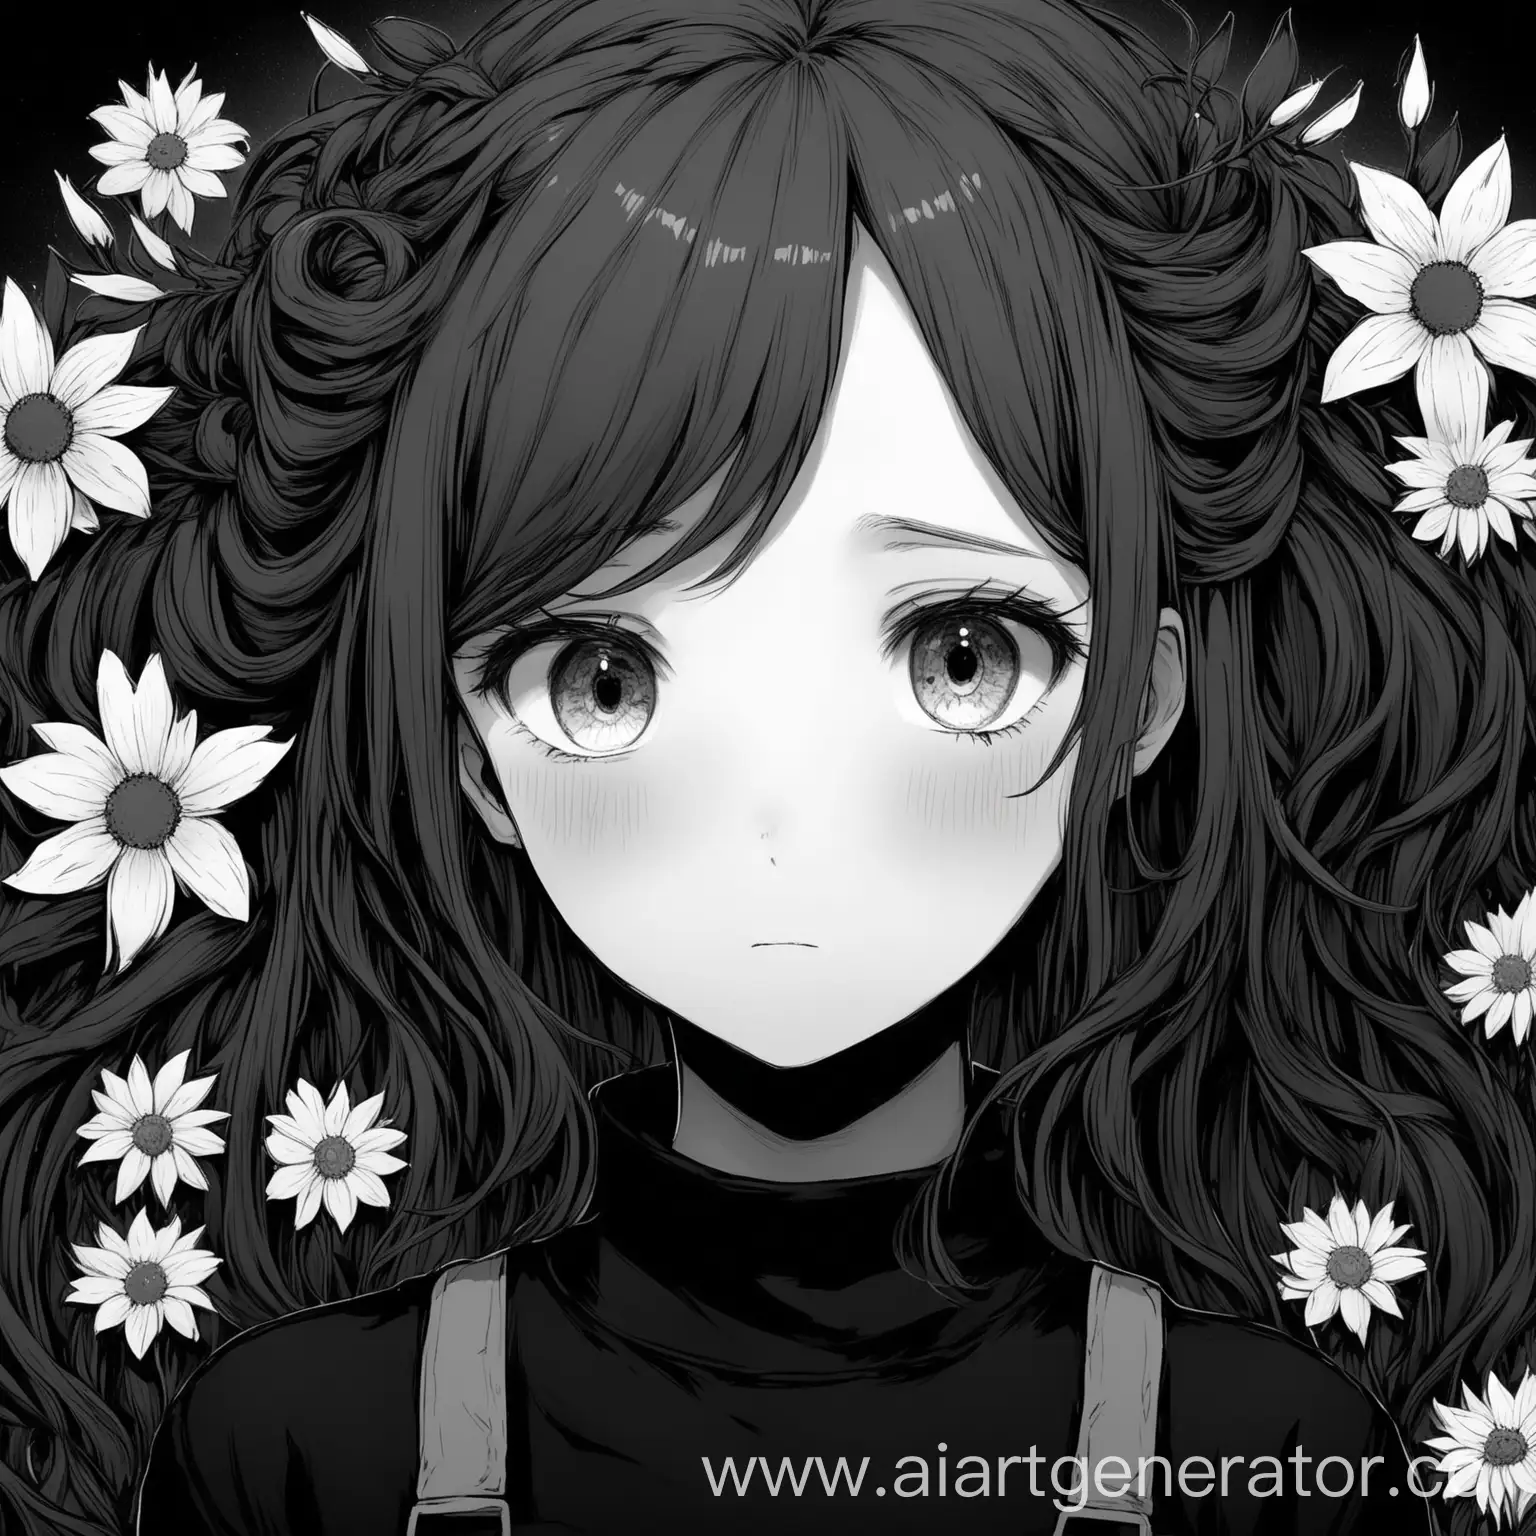 Monochrome-Portrait-of-Blushing-Girl-with-Flower-in-Hair